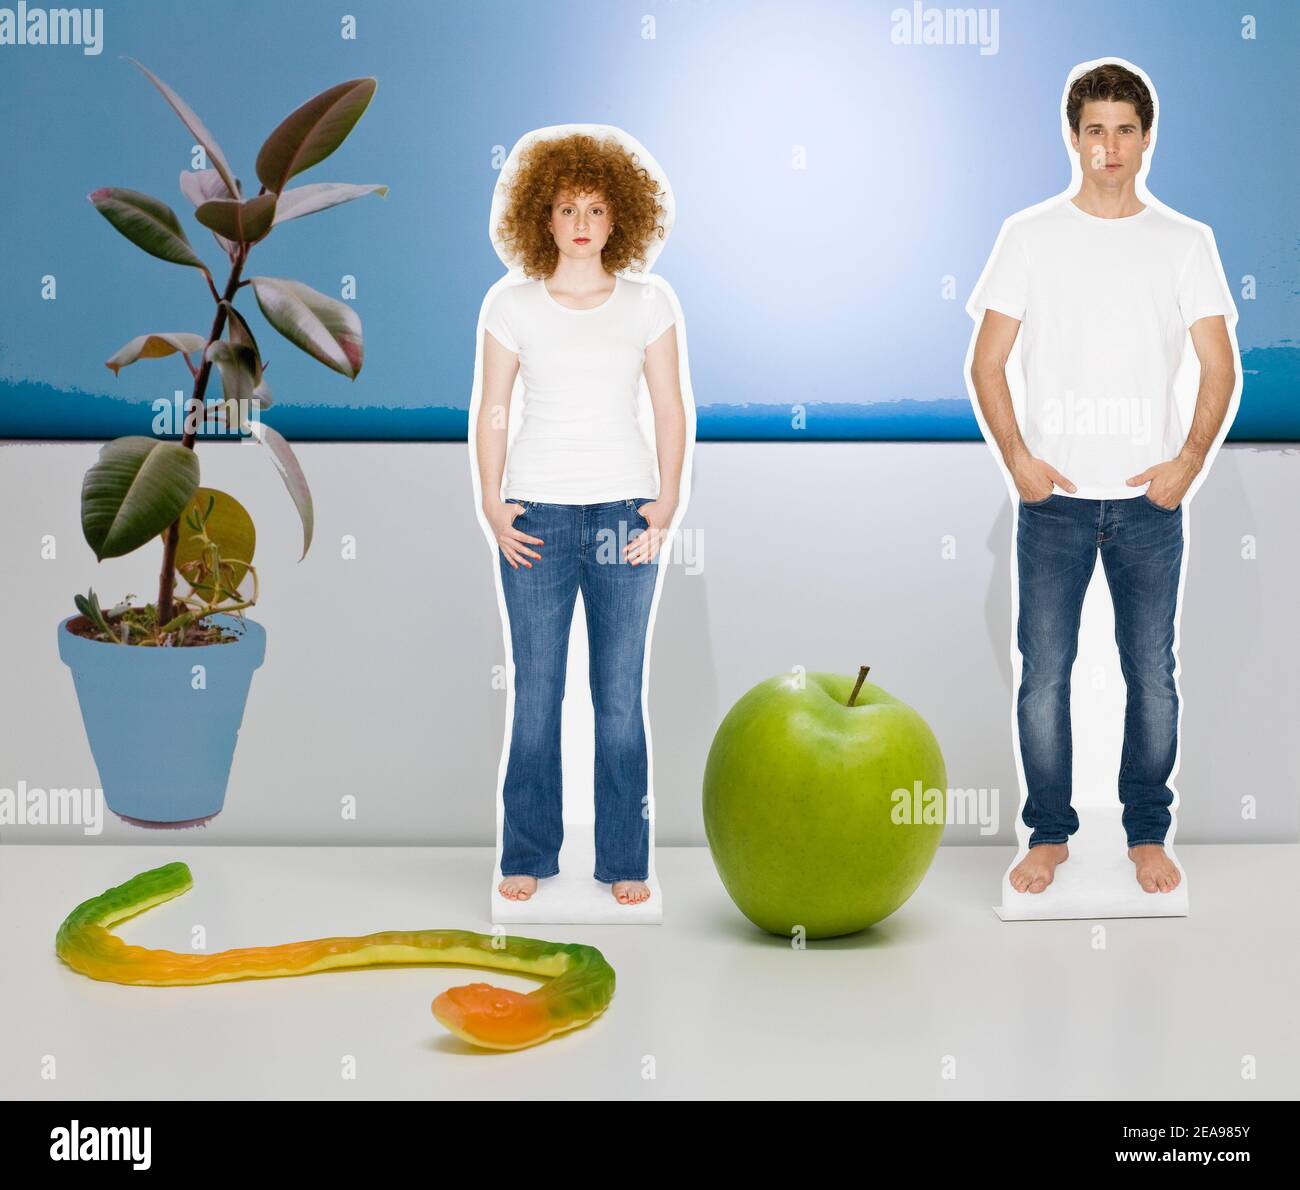 Collage, man and woman, in jeans and T-shirt, with green apple, and rubber snake, next to rubber tree, voe white-blue background, symbolic picture Stock Photo